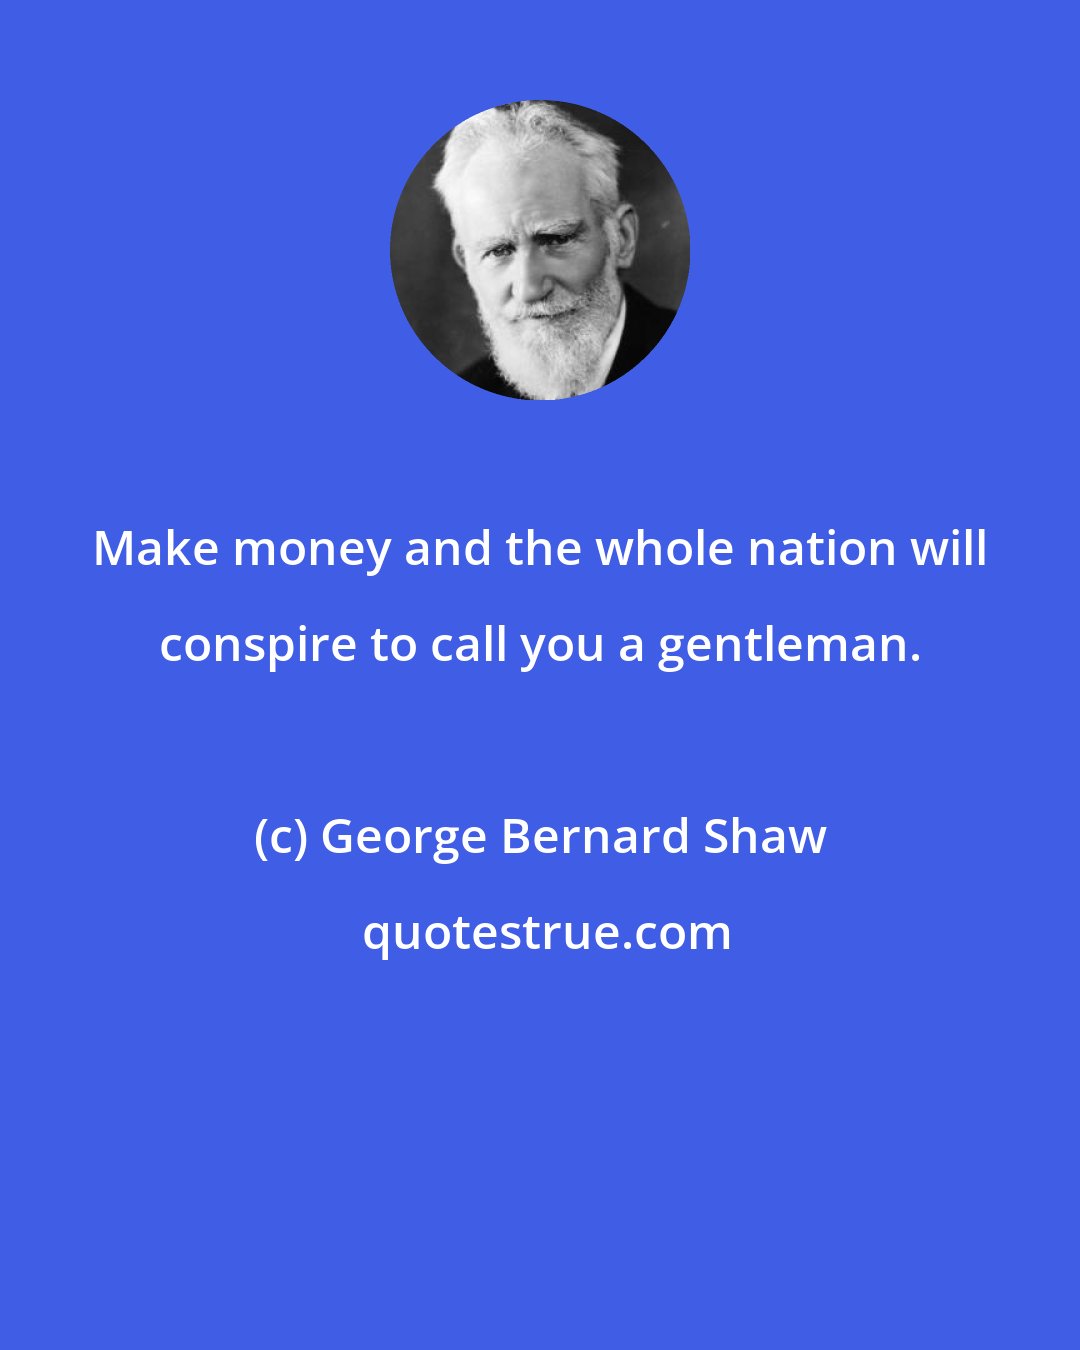 George Bernard Shaw: Make money and the whole nation will conspire to call you a gentleman.